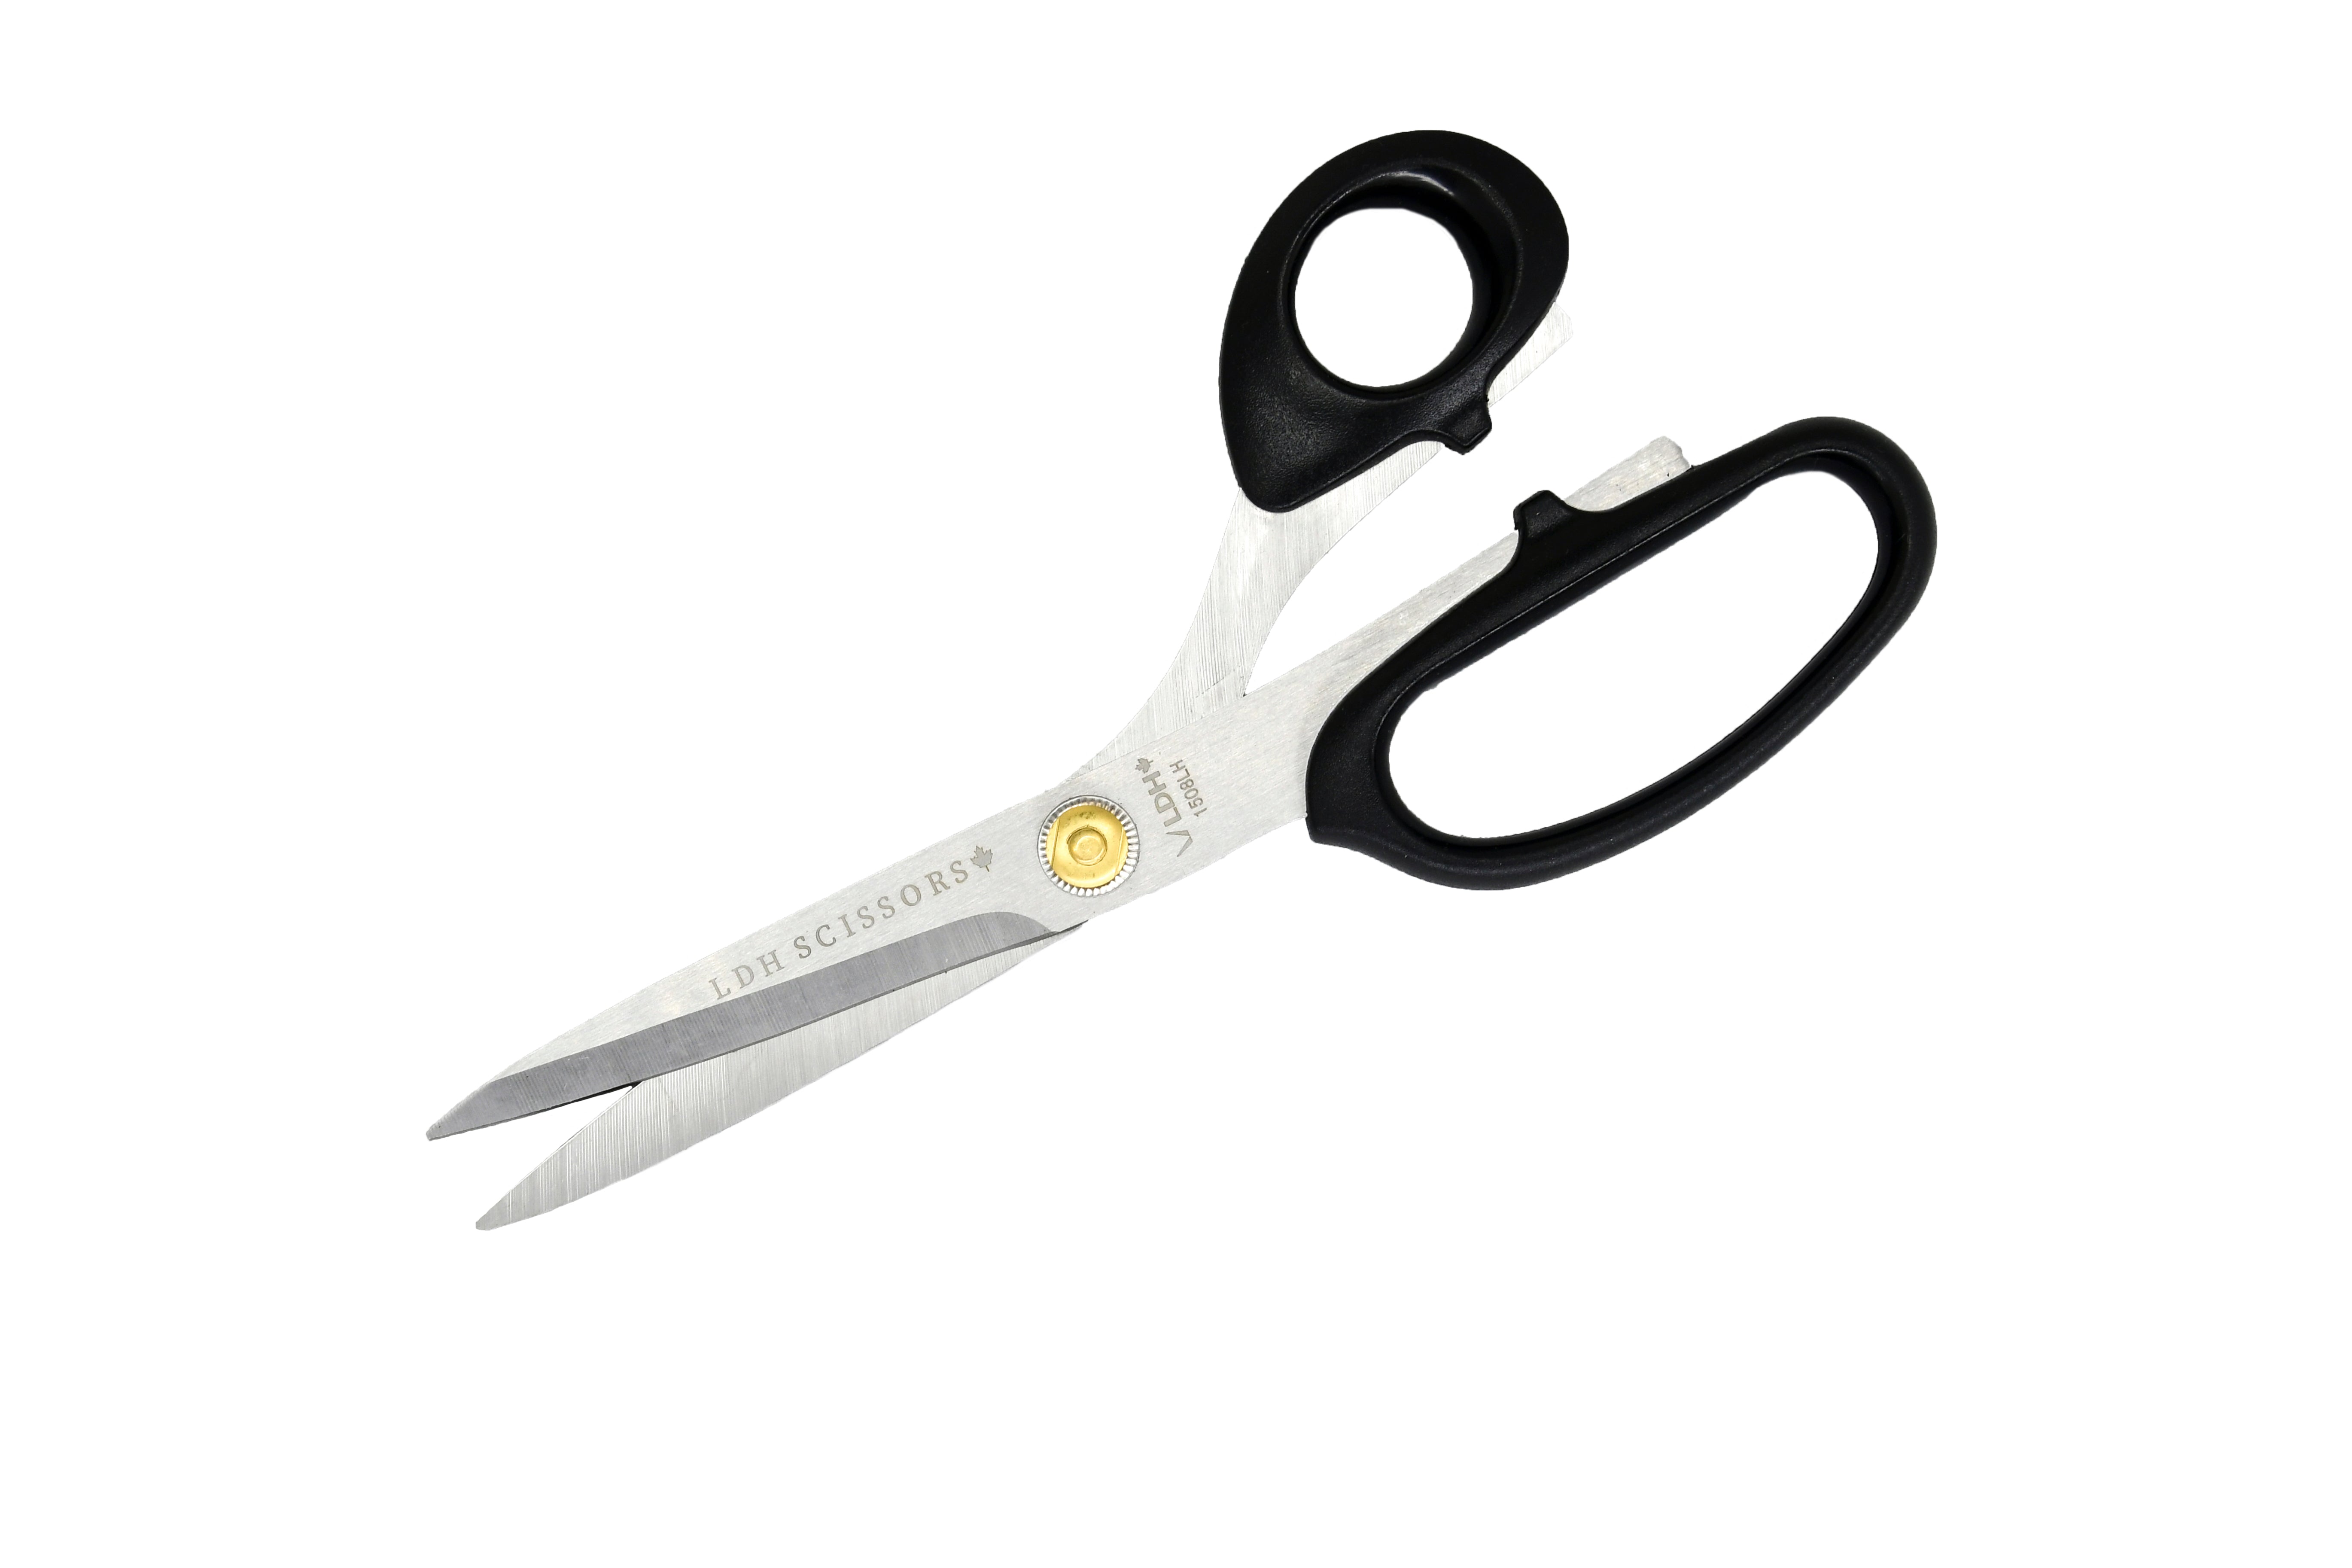 Professional Grade Thread Snips LDH Scissors Limited Edition Thread Snips  Embroidery Scissors for Sewing, Quilting, Embroidery MIDNIGHT 